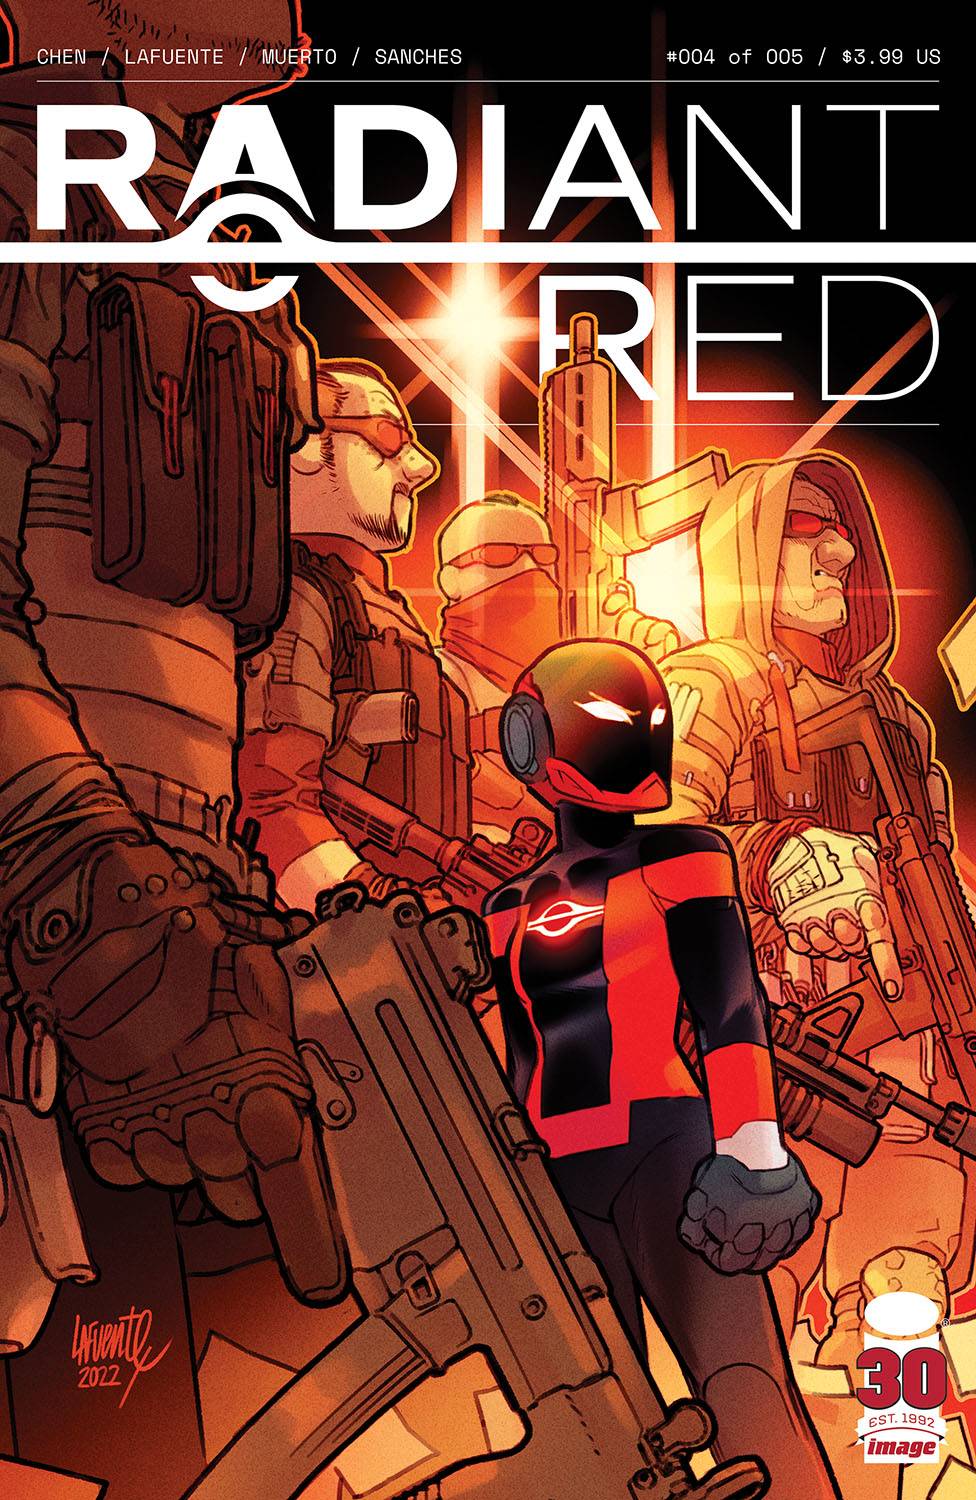 RADIANT RED #4 (OF 5) CVR A LAFUENTE & MUERTO